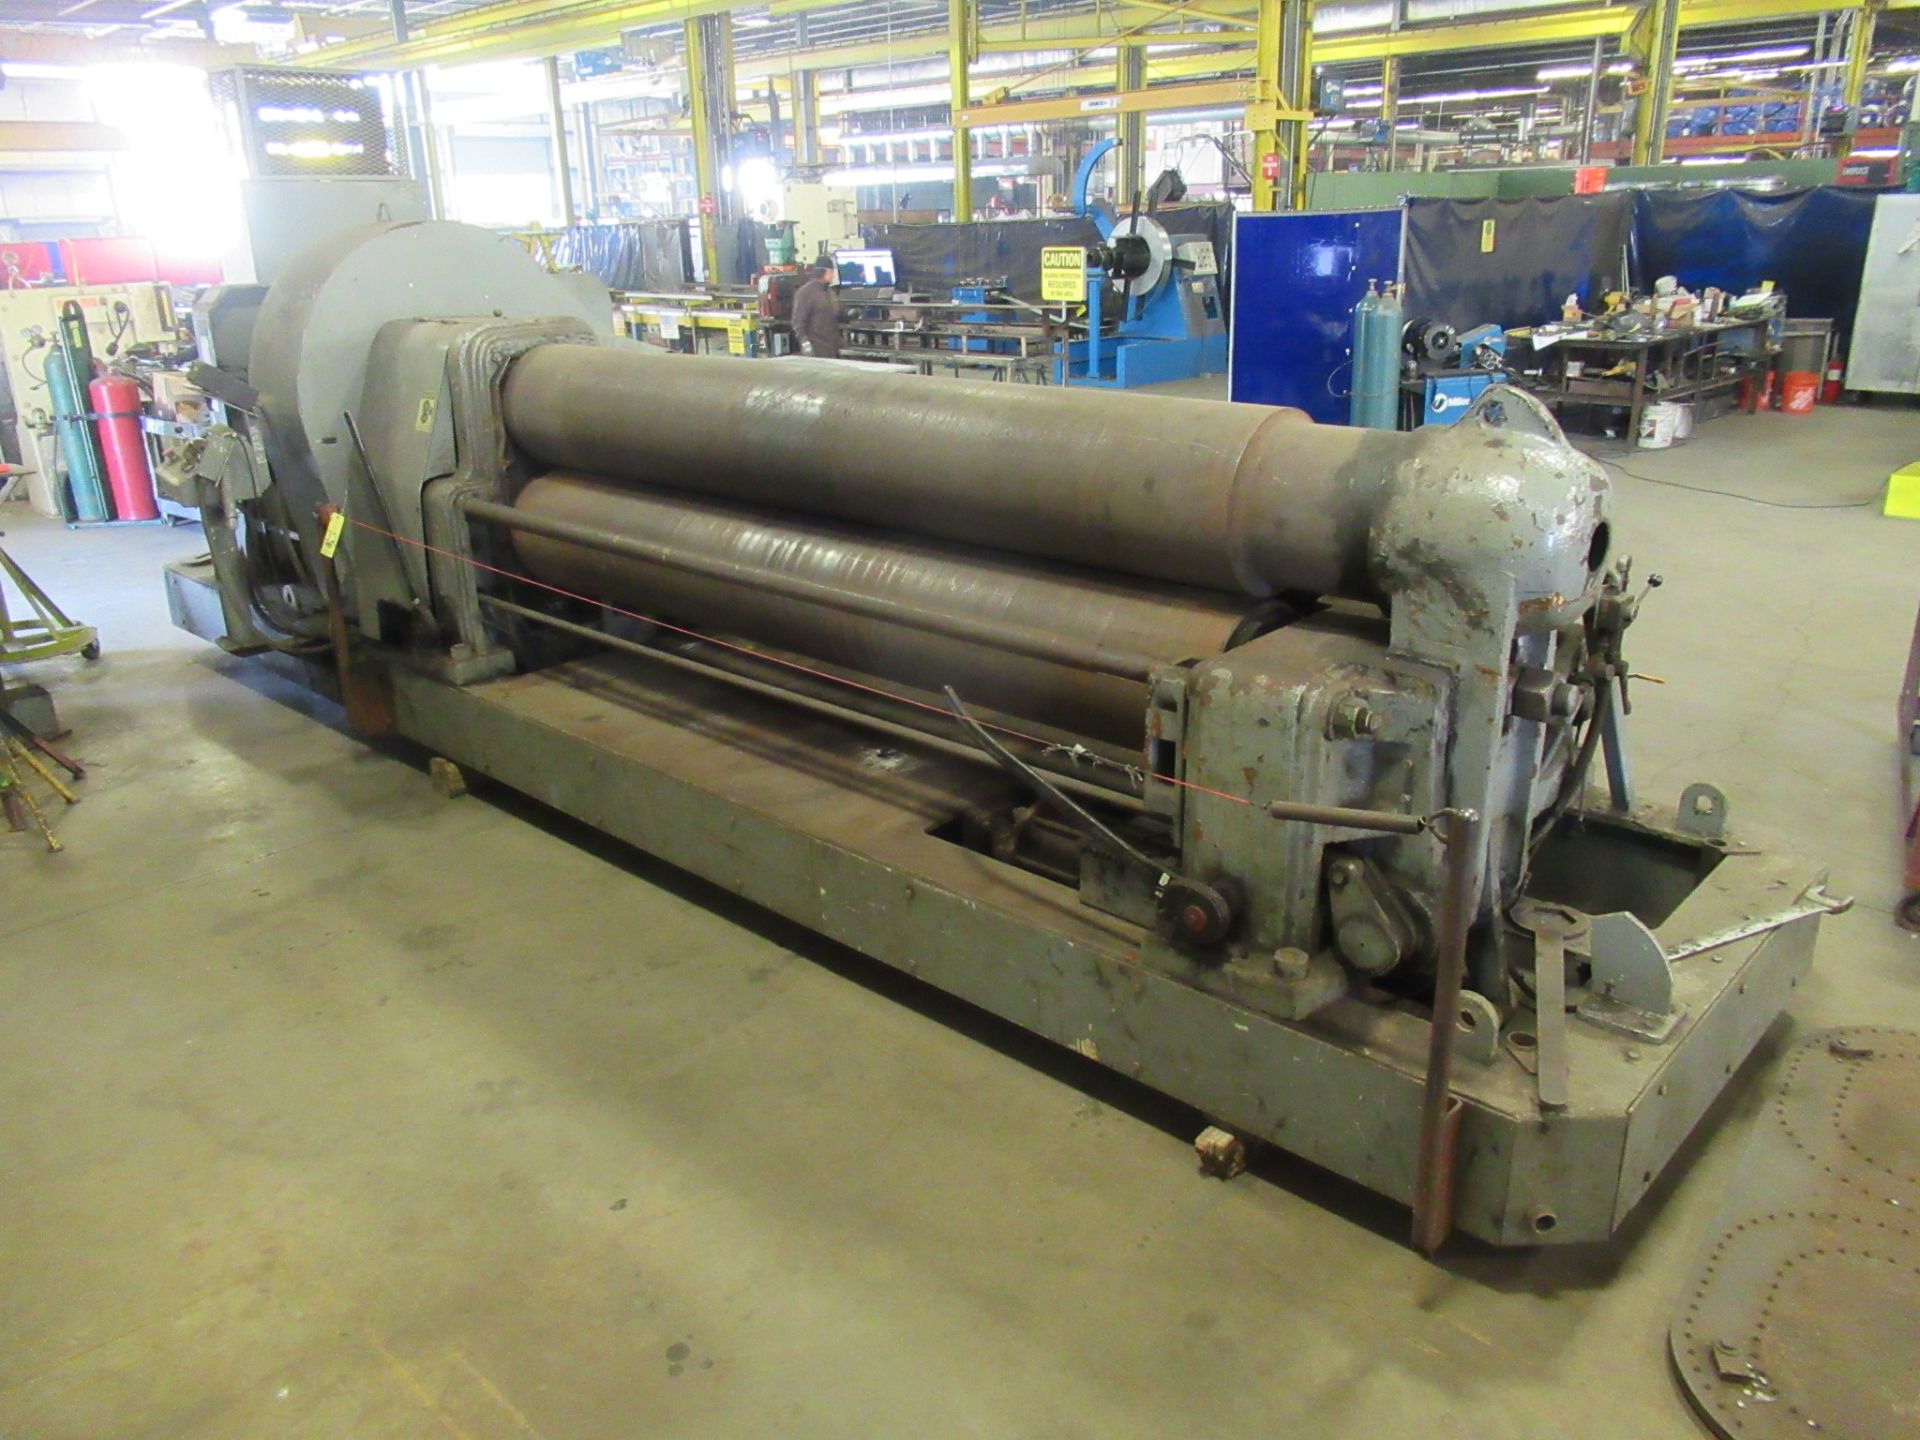 INITIAL PINCH PLATE ROLL, WEBB 1-1/8” X 10’ MDL. 16L, 18” top roll, S/N 5379 (Location 7: McCorvey - Image 2 of 10